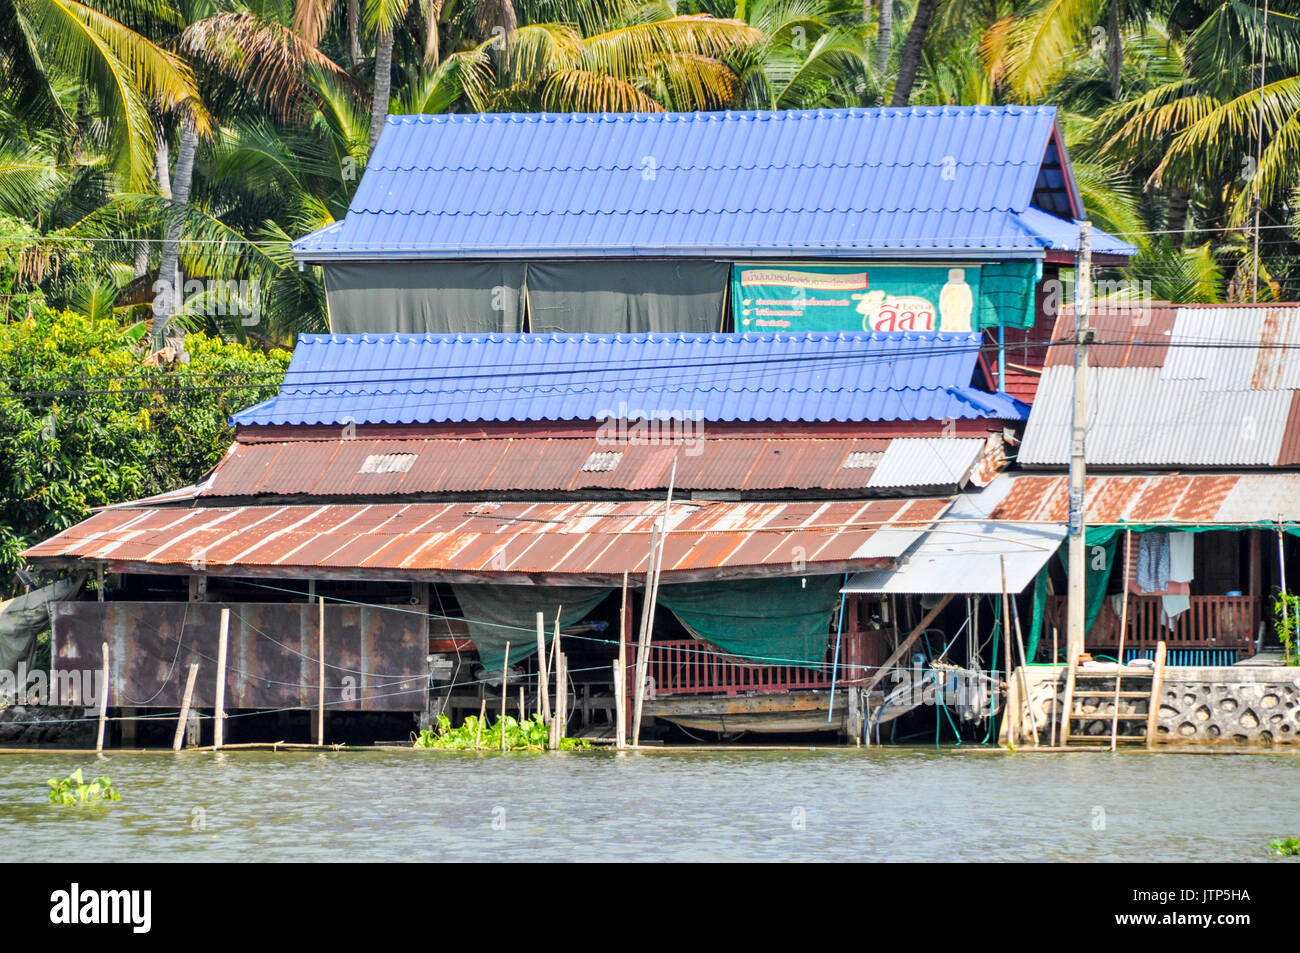 A ramshackle house on the banks of a river in Thailand. Stock Photo